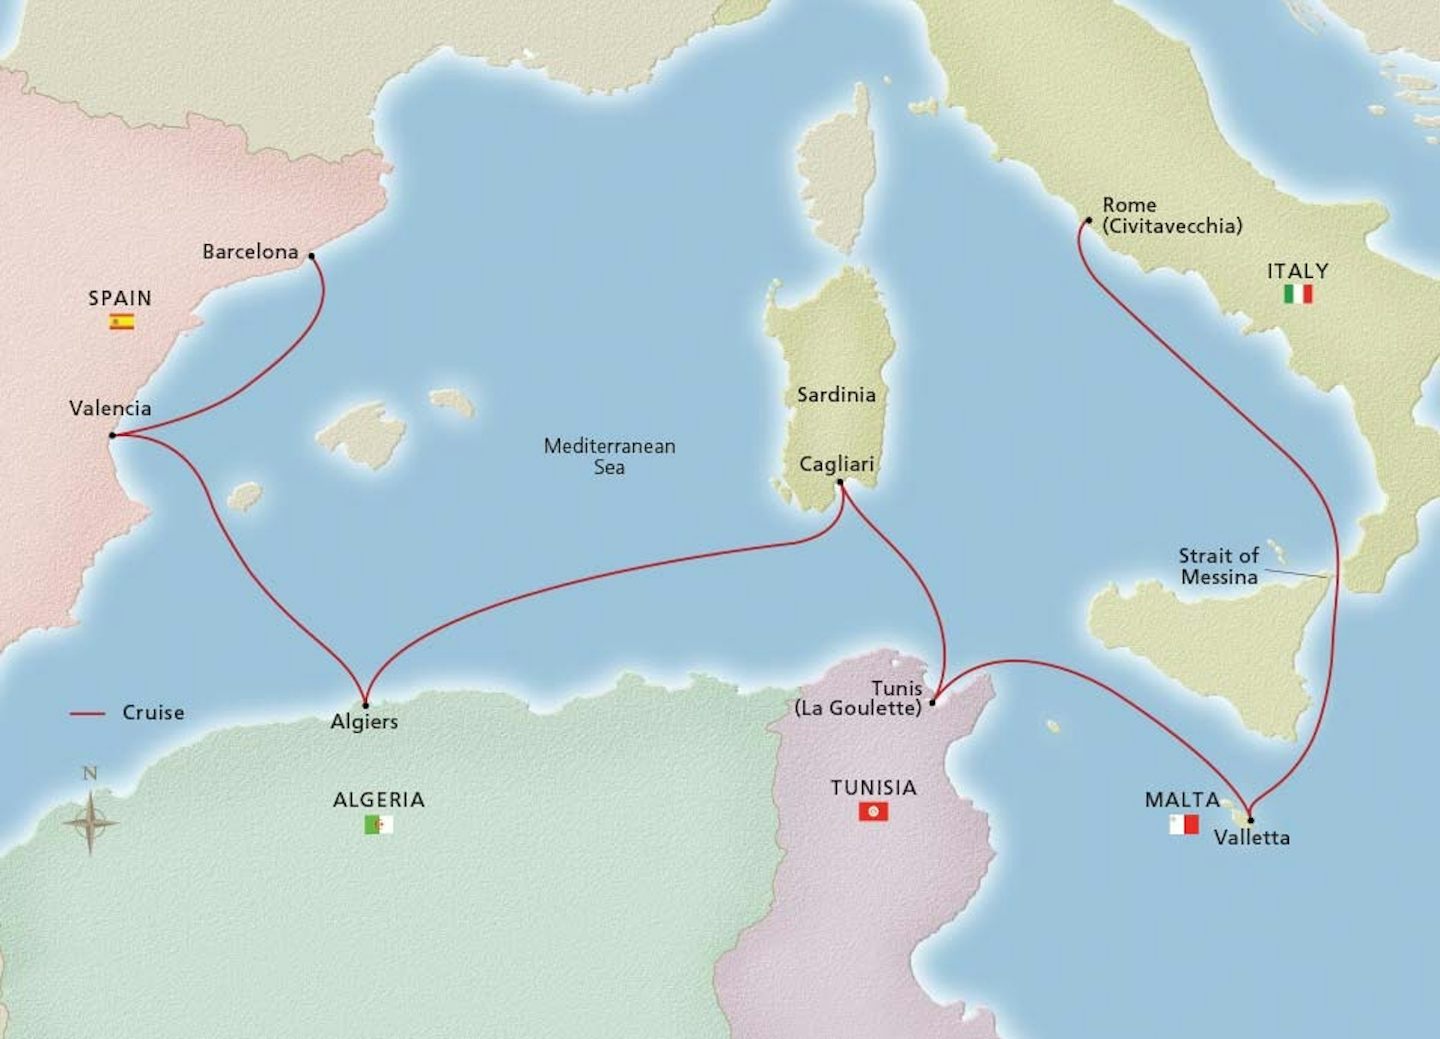 Our cruise of the southern Mediterranean